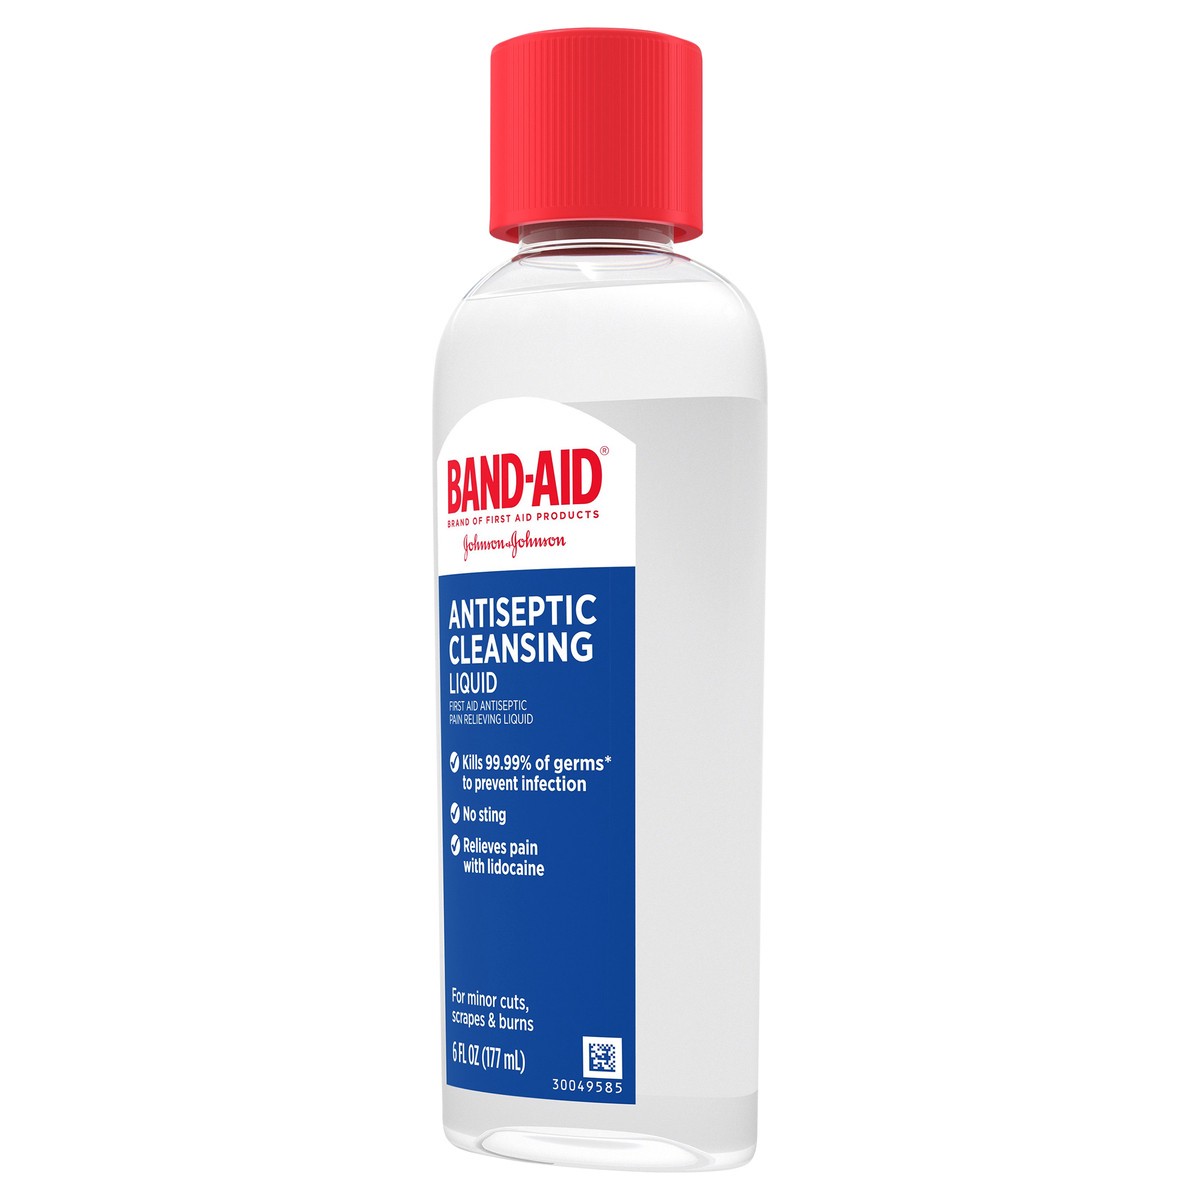 slide 3 of 7, BAND-AID Antiseptic Cleansing Liquid, First Aid Antiseptic Wash Relieves Pain & Kills Germs, with Benzalkonium Cl Wound Antiseptic & Lidocaine HCl Topical Analgesic, 6 fl. oz, 6 fl oz